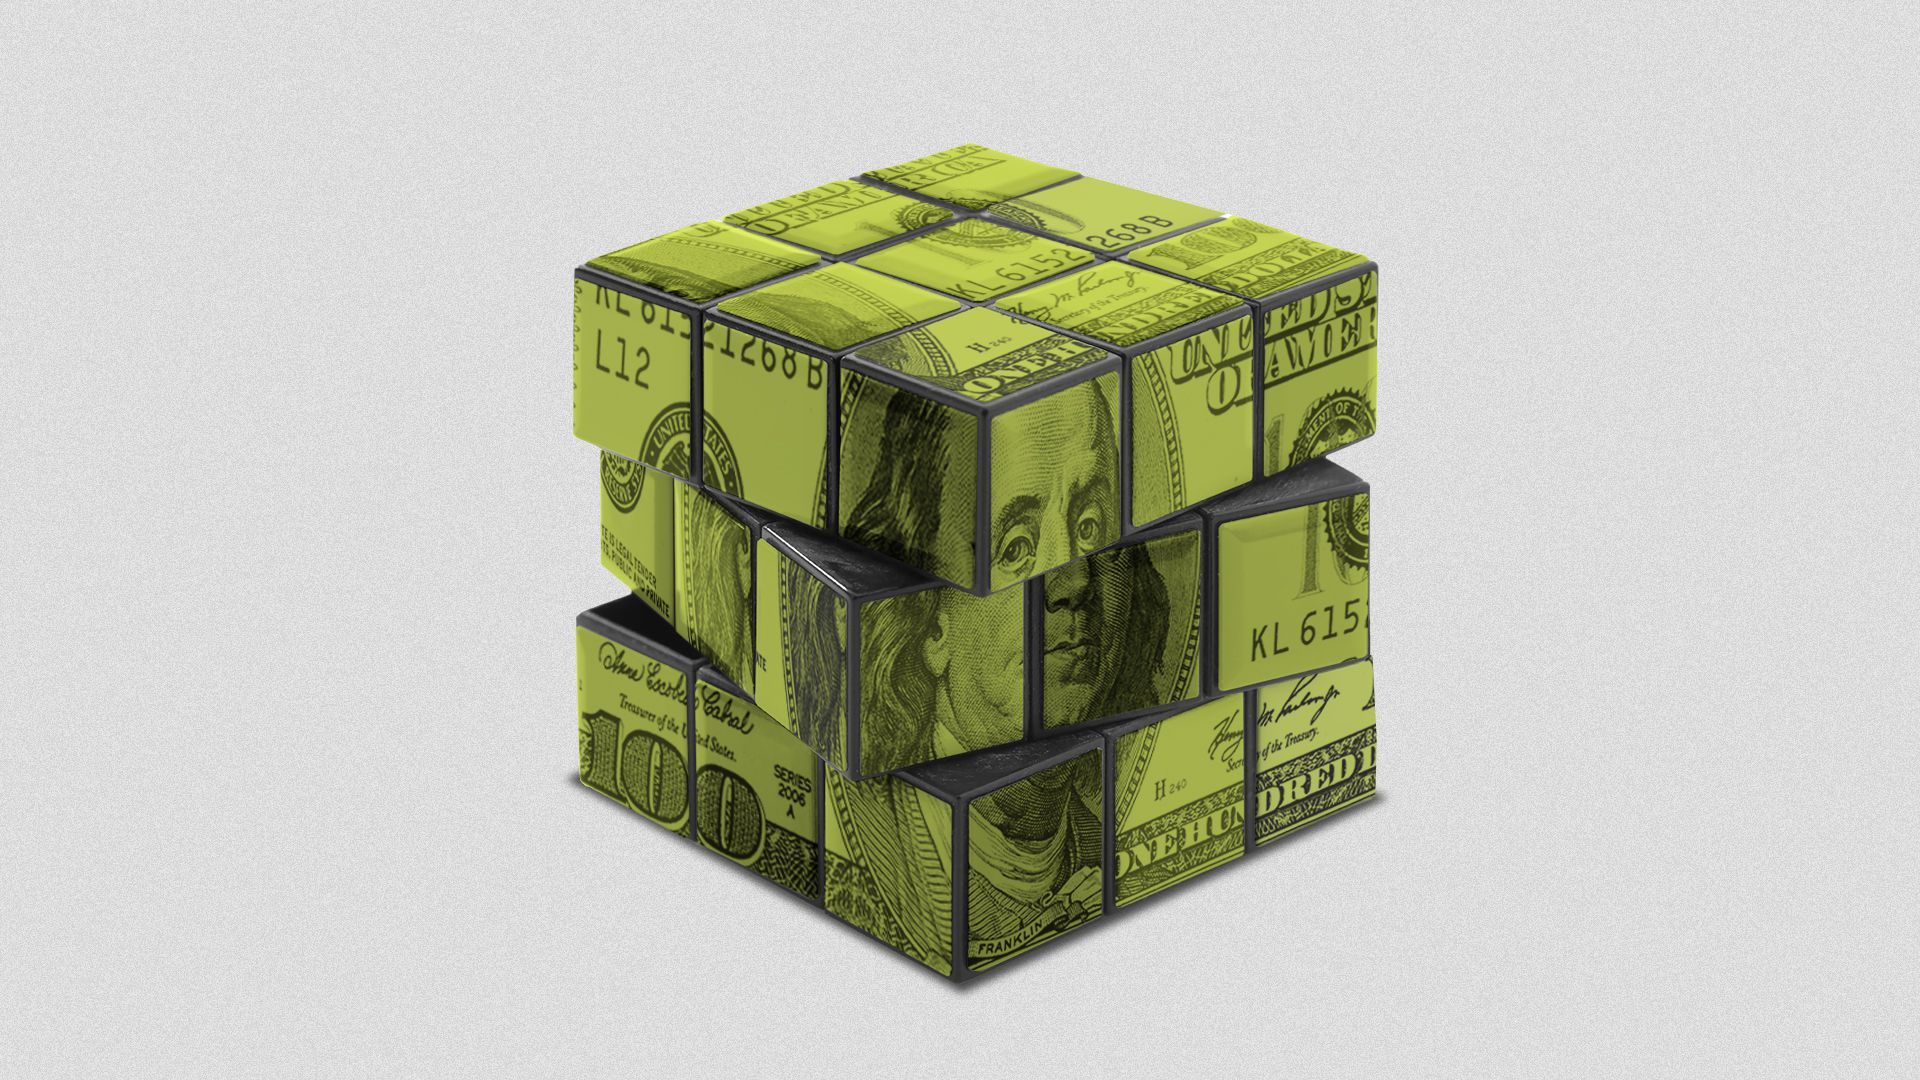 Illustration of a hundred dollar bill in the shape of a Rubik's cube